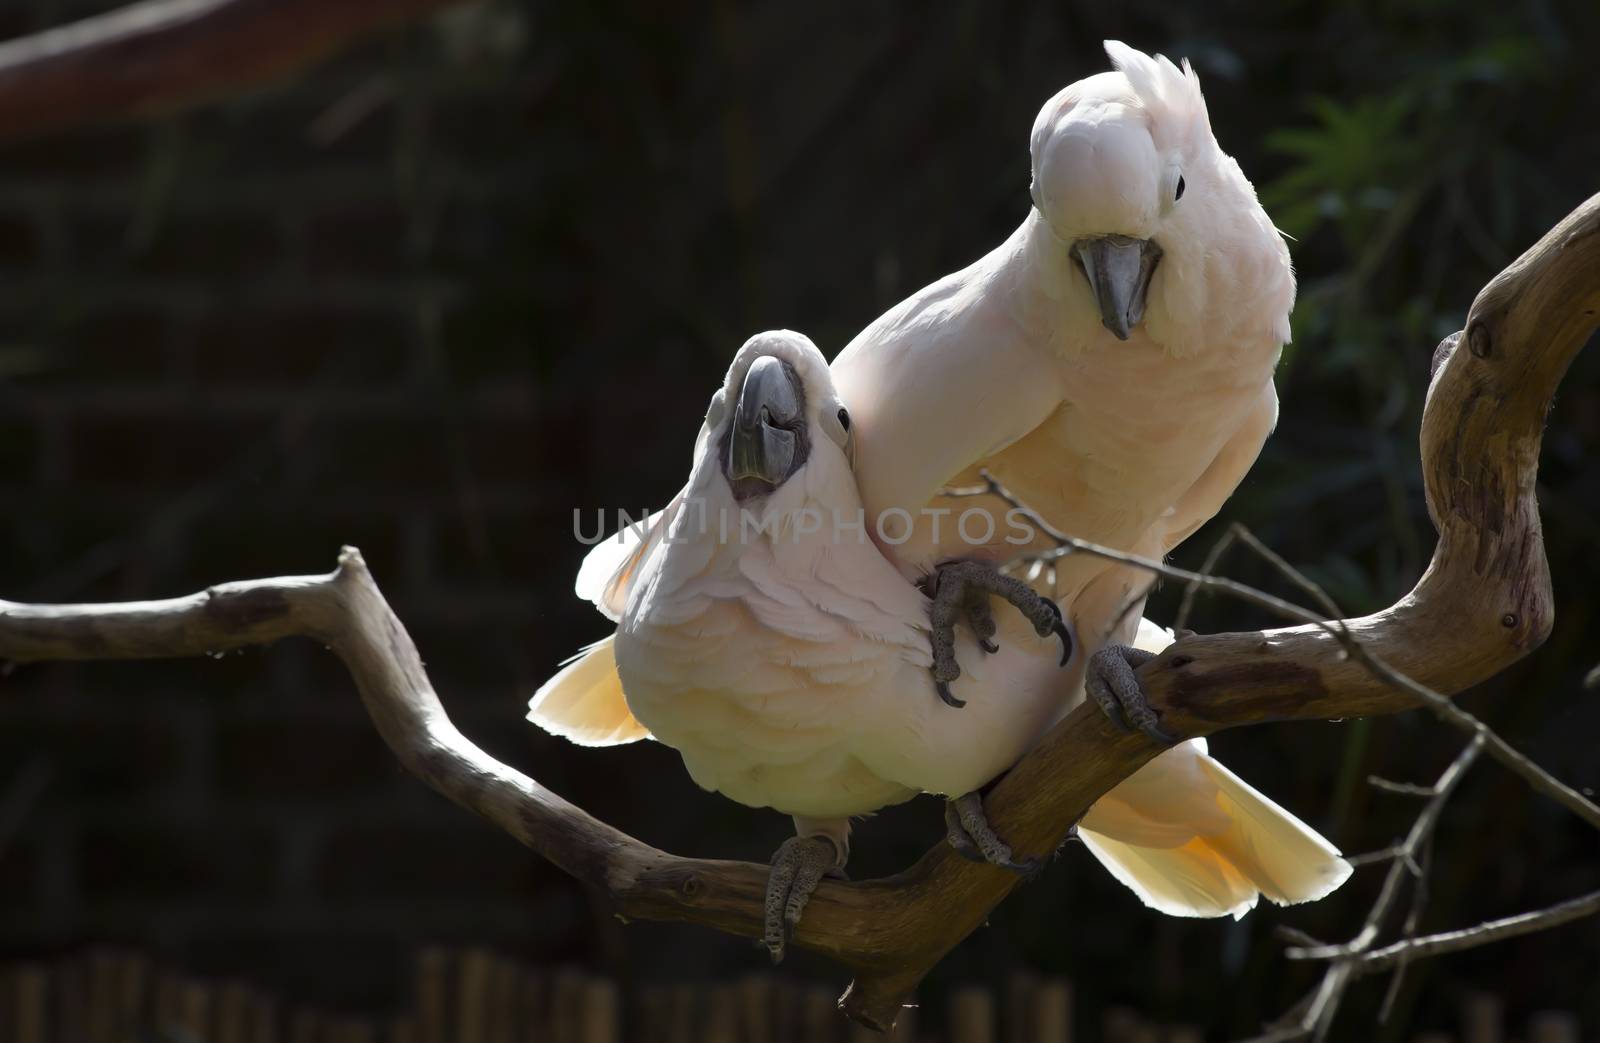 Two salmon-crested cockatoos